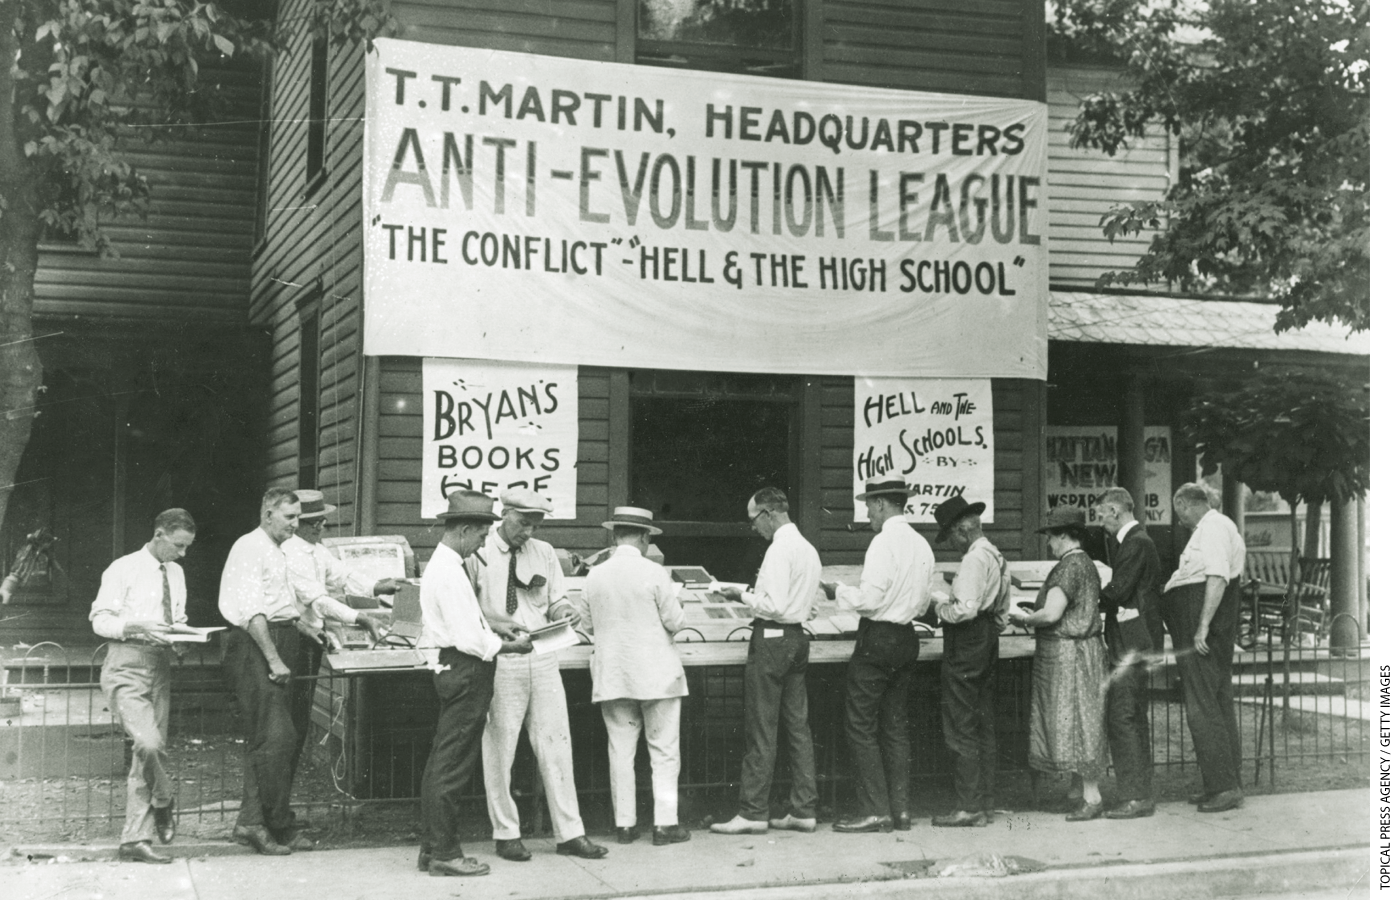 Anti-evolution books were sold in Dayton during what became known as the “Scopes Monkey Trial.”